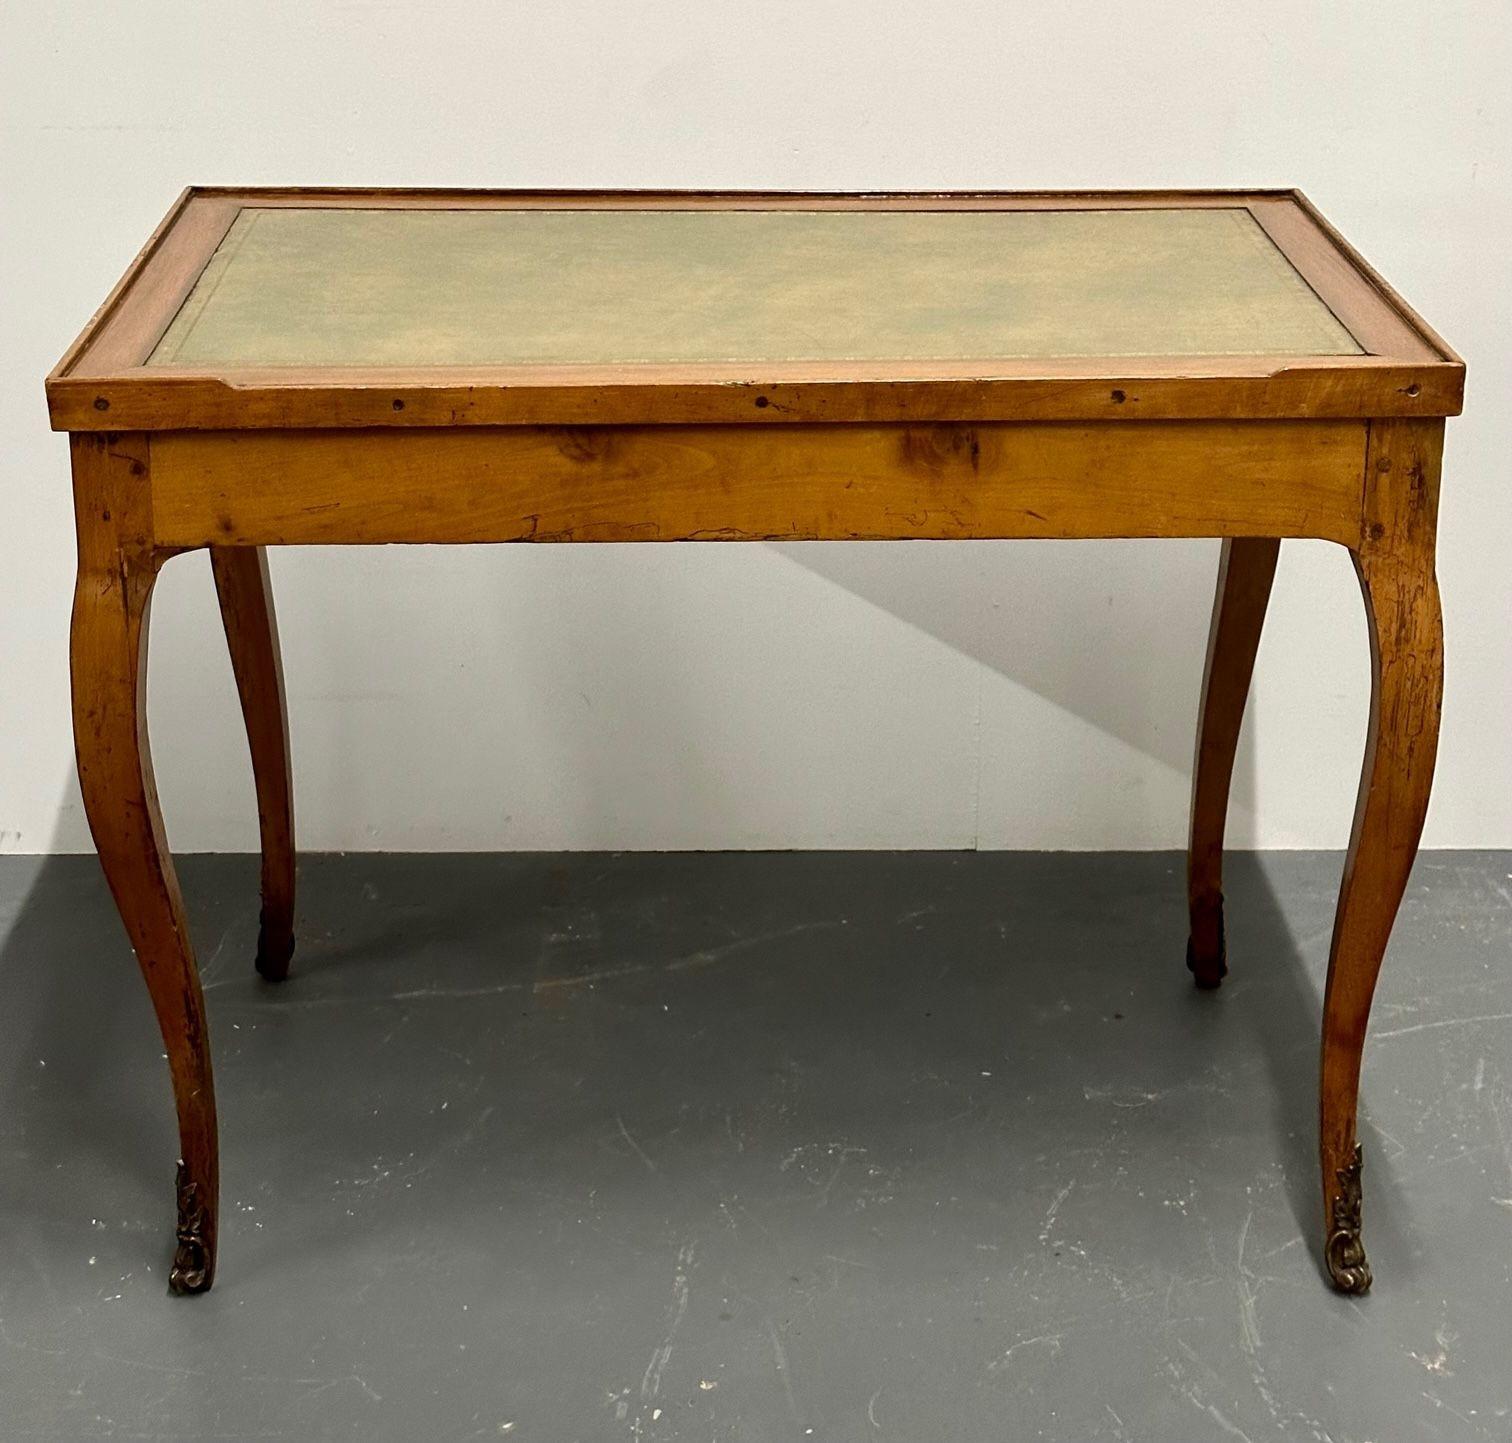 A French Tric-Trac Table, Antique Game / Backgammon Table, Leather Top
 
A Rare and Fine Late 18th Early 19th Century Games Table. Mortise and Tenon construction on this wonderful games table having a green gilt tooled leather top for card when